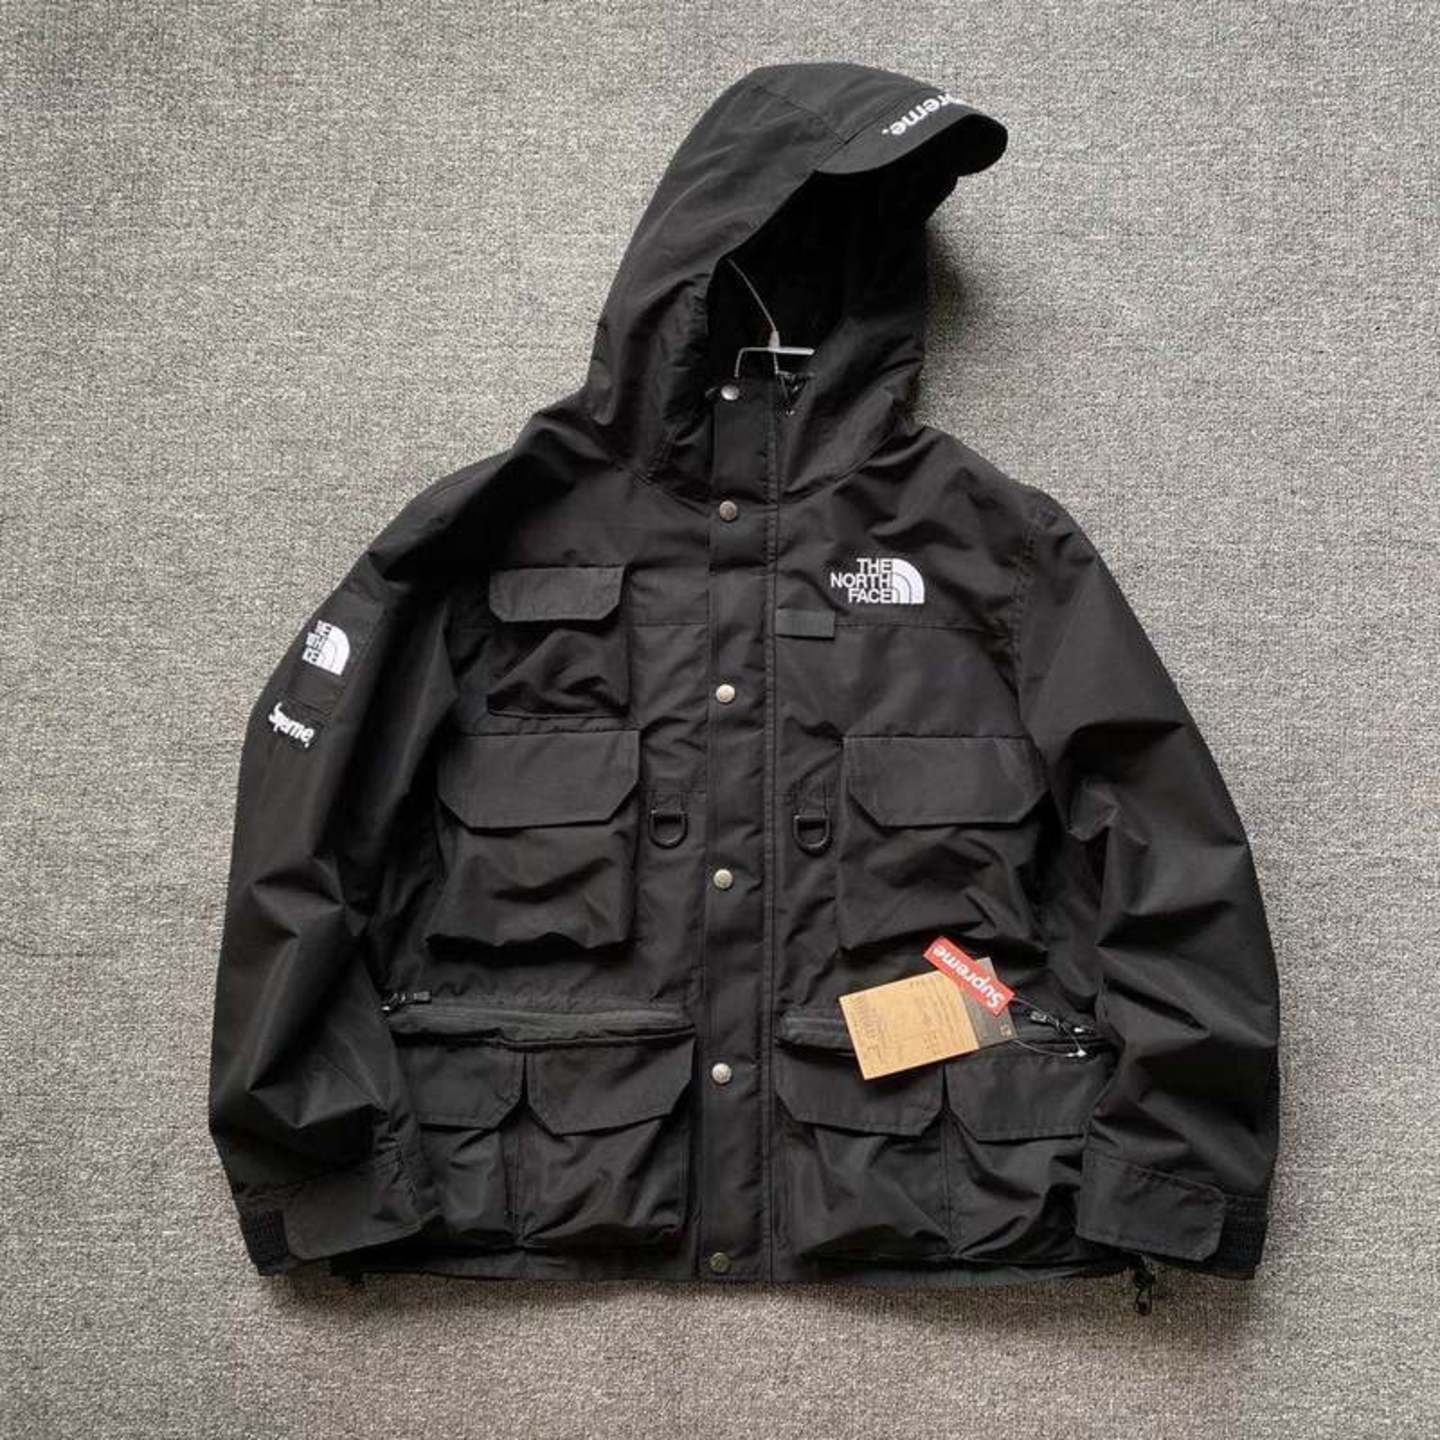 Supreme x The North Face Cargo Jacket